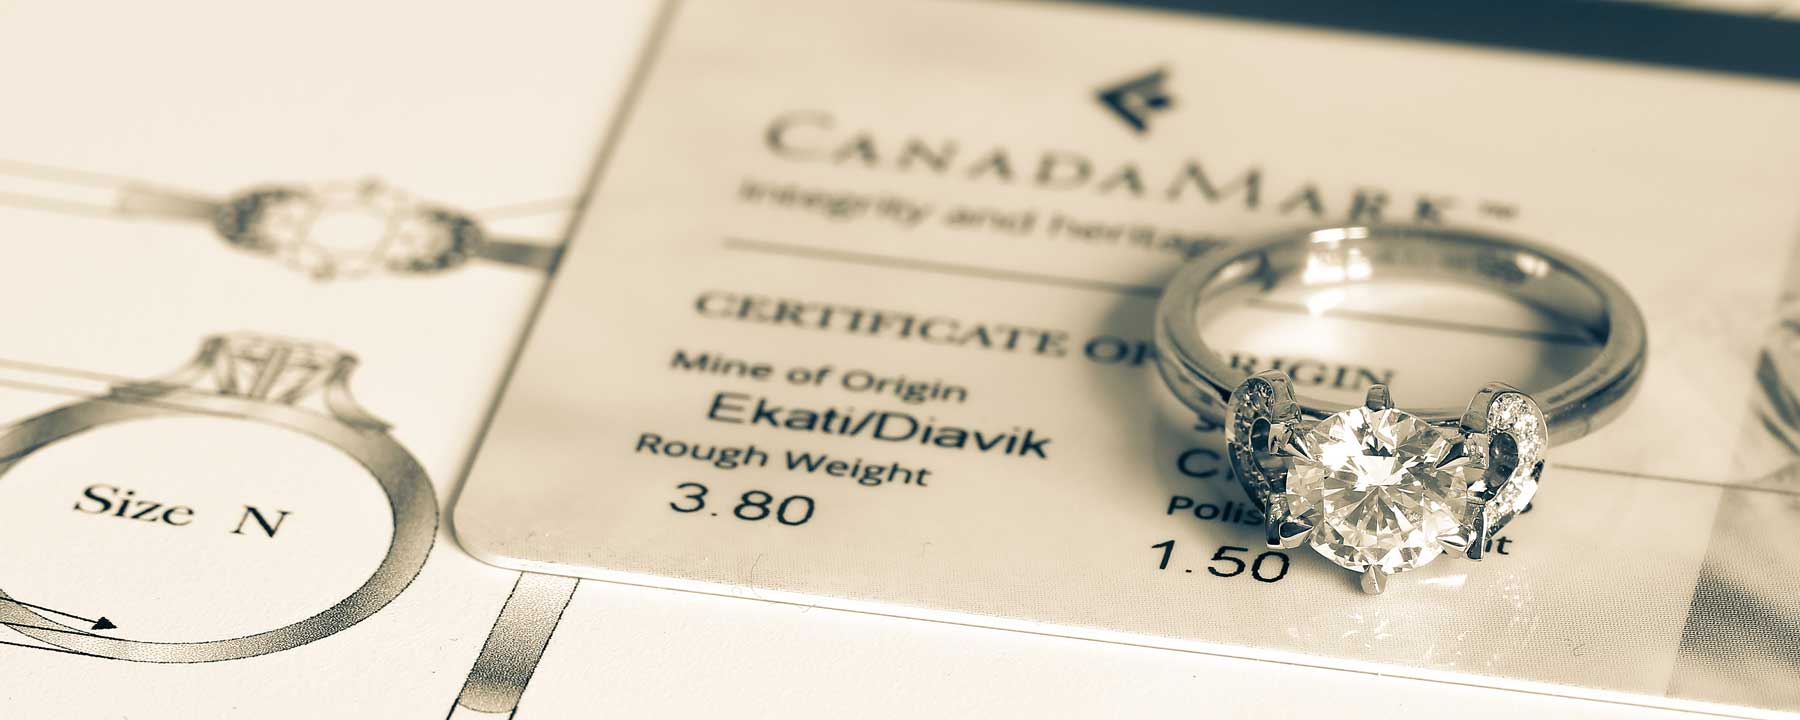 A bespoke diamond engagement ring with its unique Canadamark certification